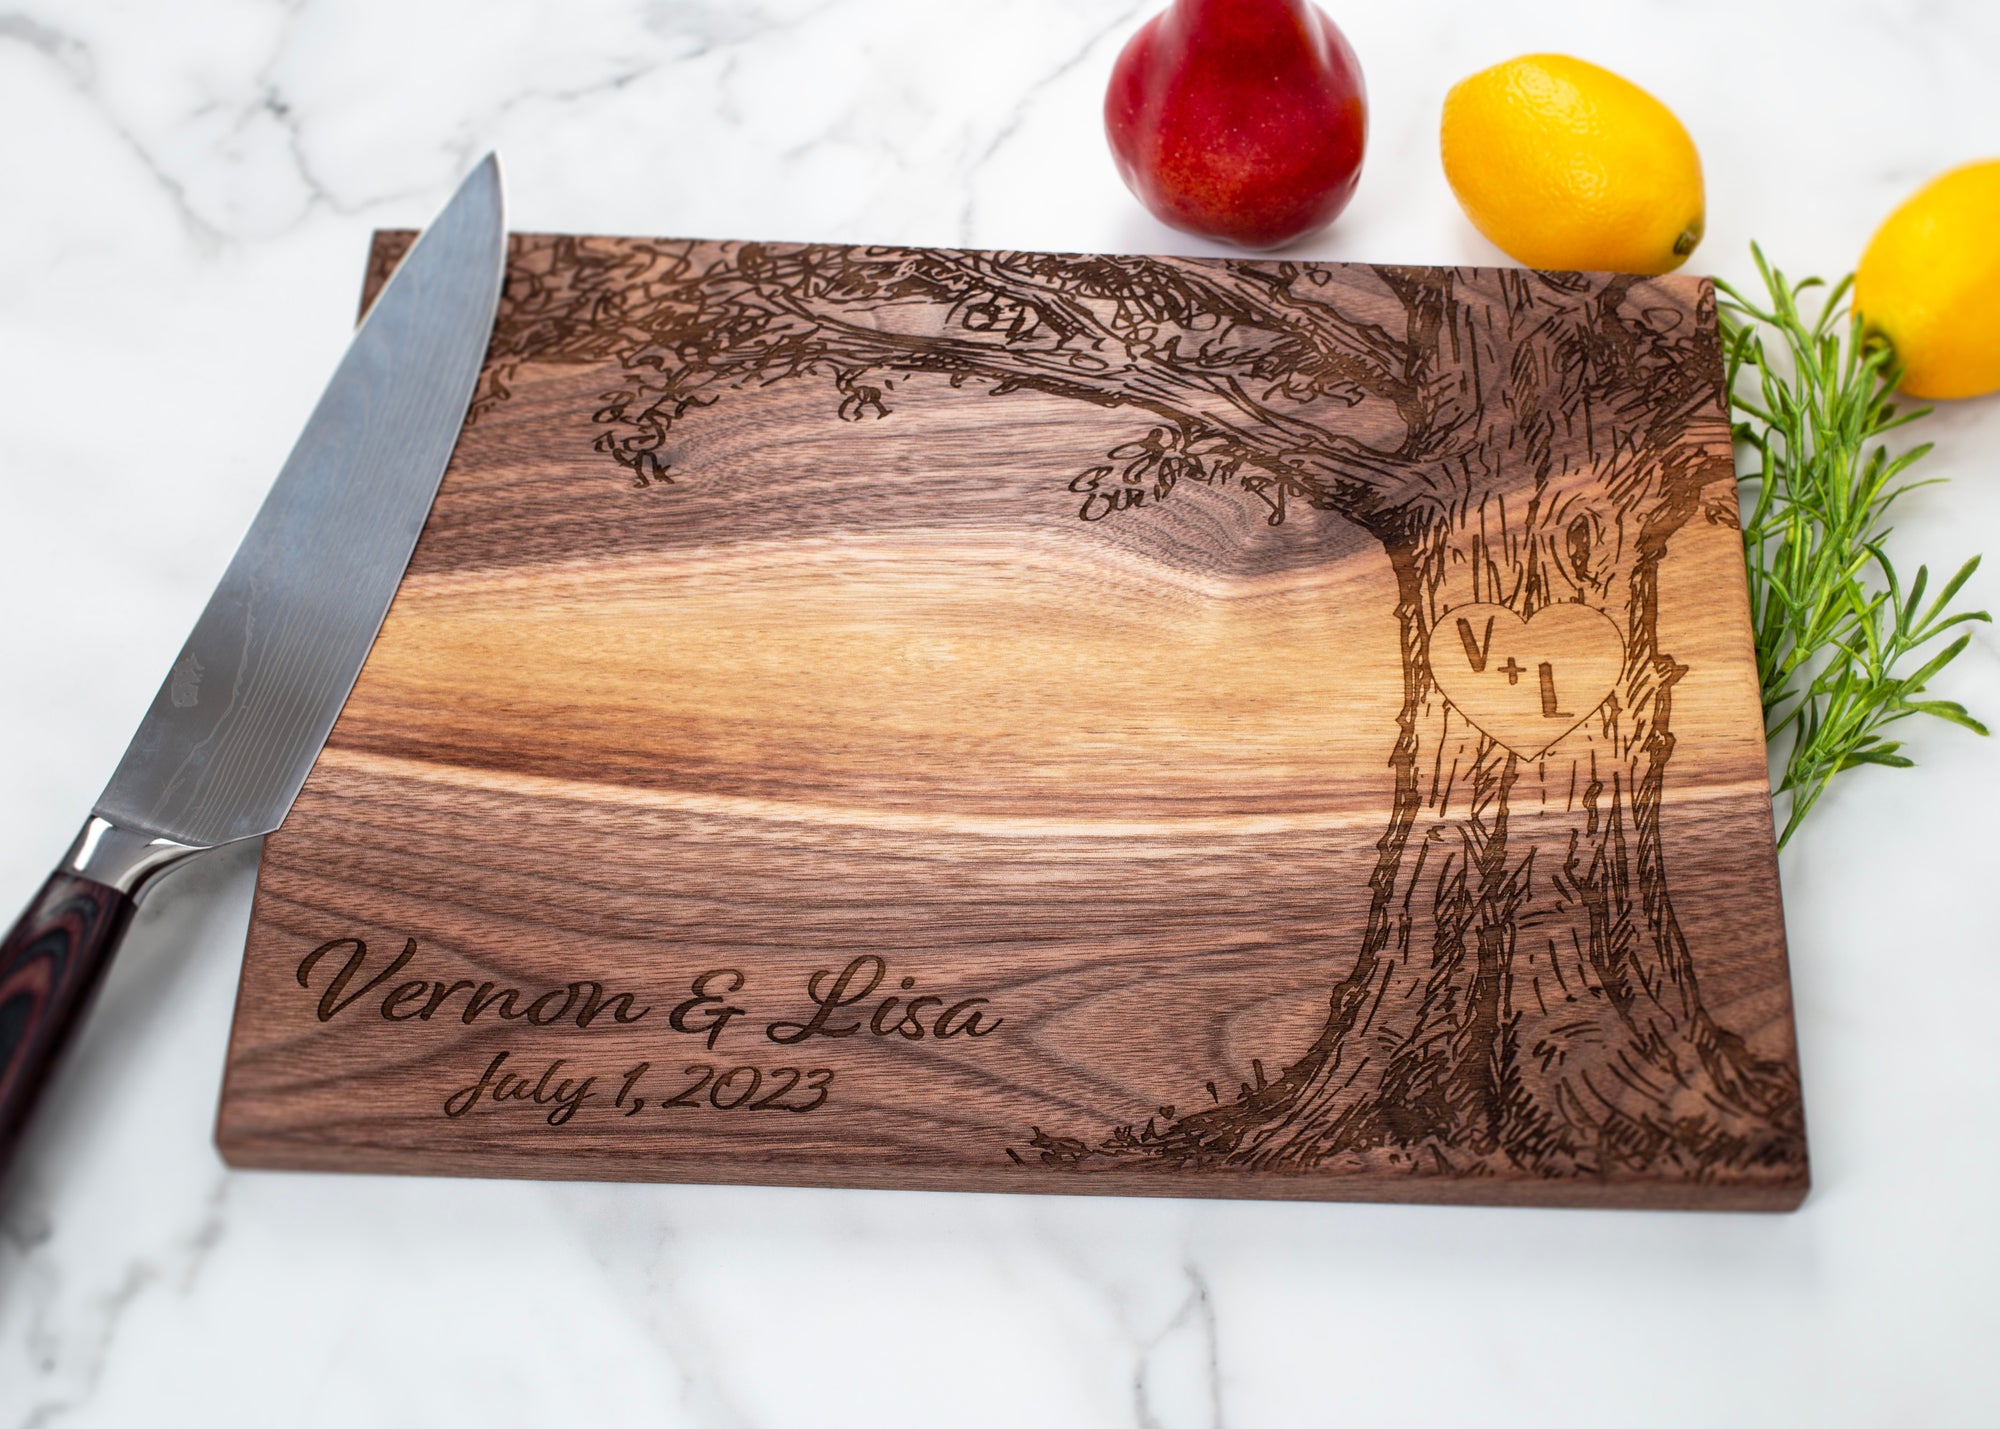 MADE IN THE USA A Beautiful Personalized Laser Engraved Cutting Board with your choice of wood type and size. Each board is designed and hand-crafted in house from start to finish by carefully selecting each piece of raw lumber followed by using top of the line machinery. FREE SHIPPING